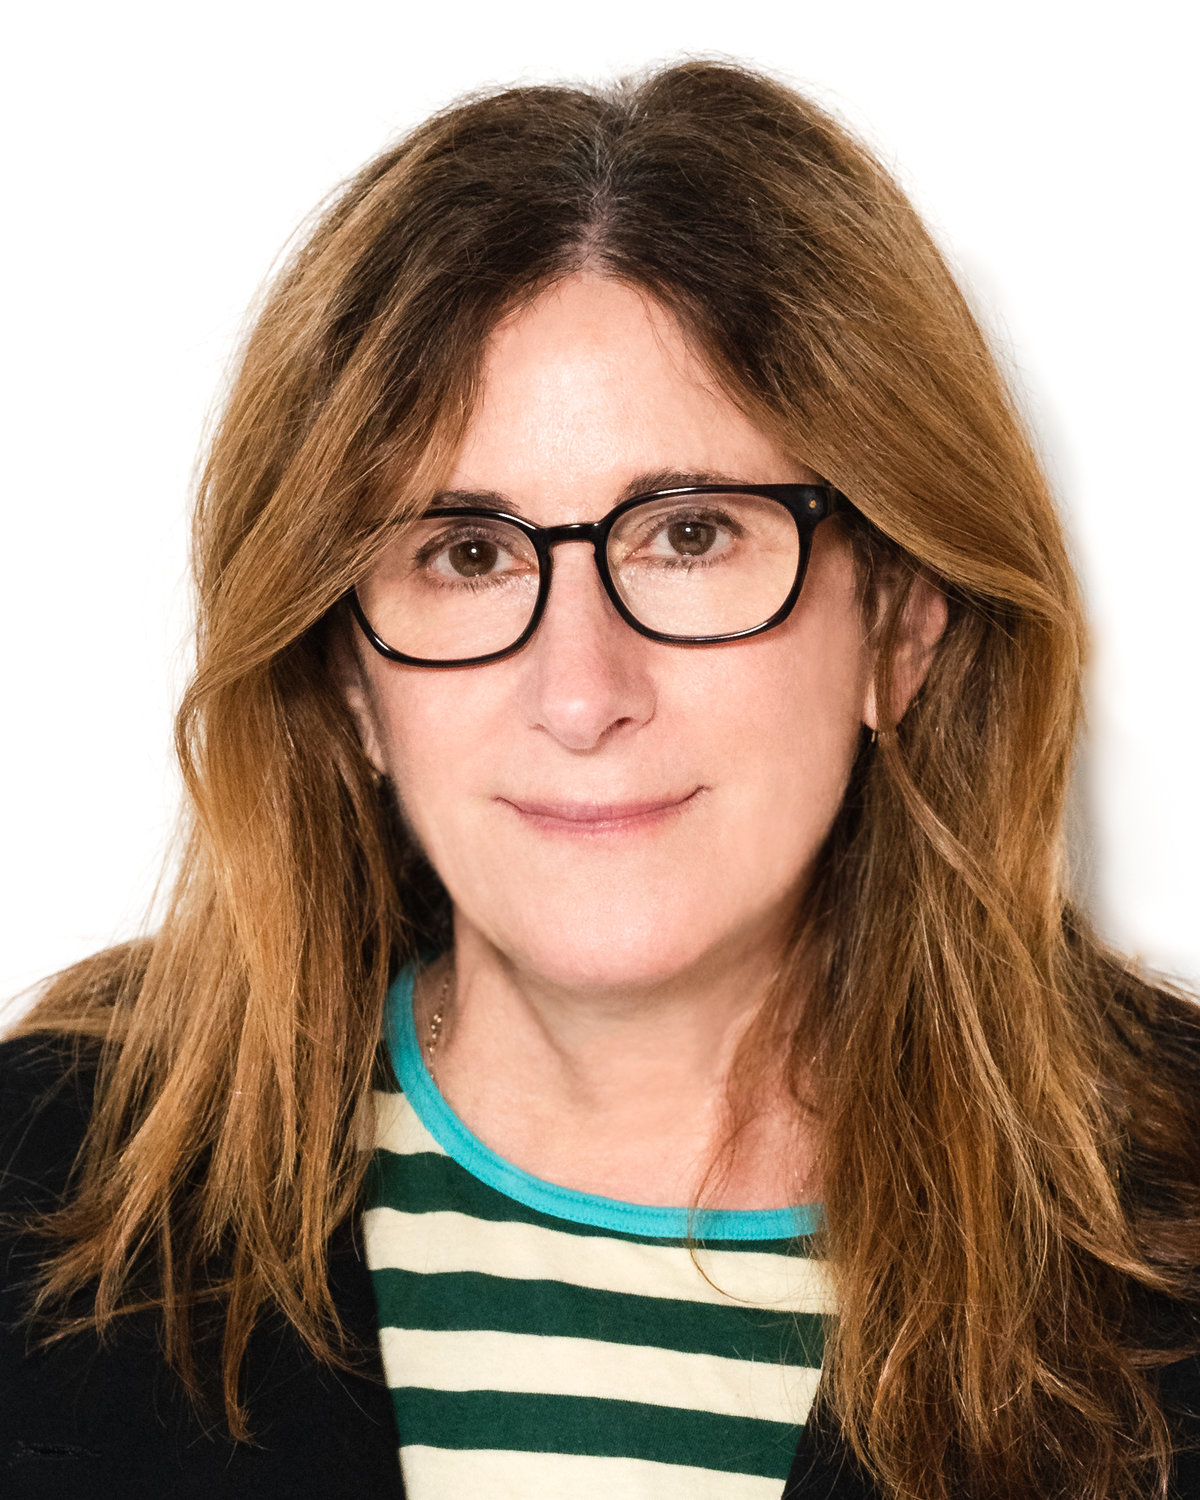 Oscar nominee Nicole Holofcener will receive the Nantucket Film Festival's Screenwriters Tribute in June at the Sconset Casino.